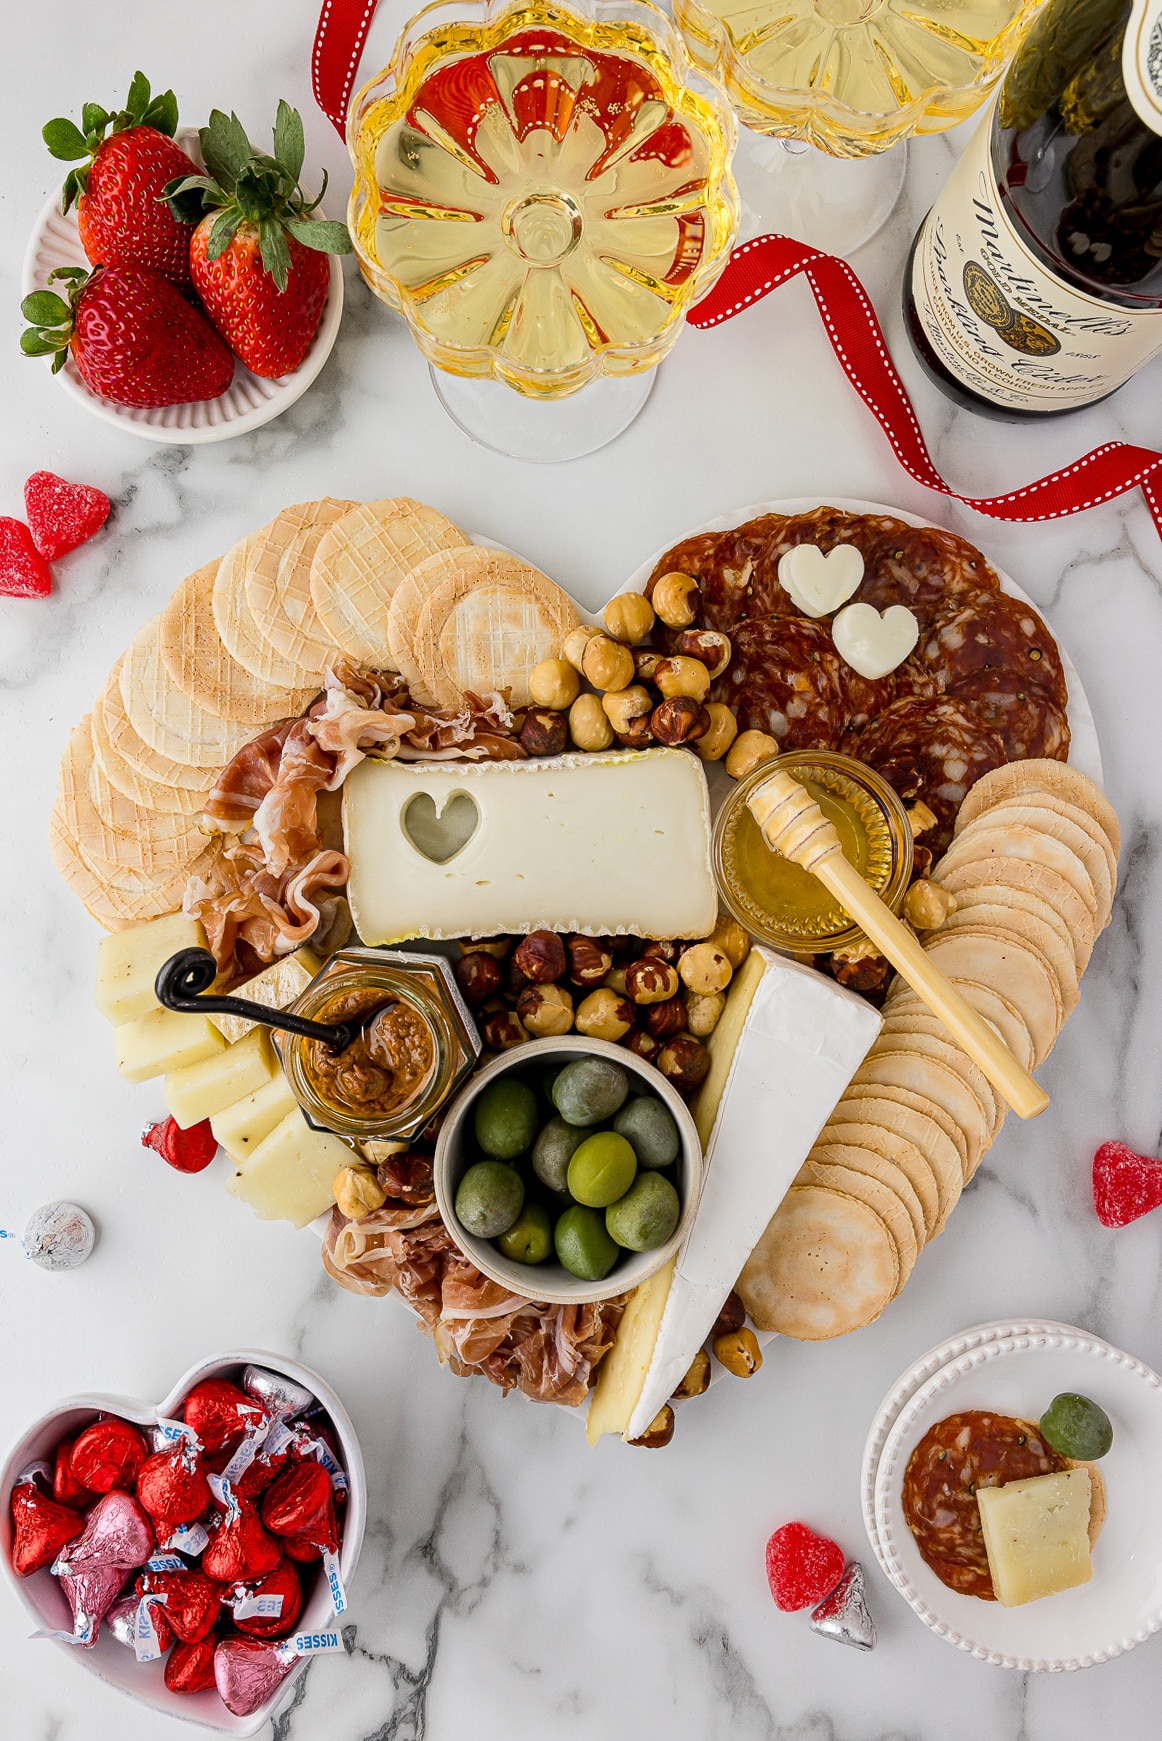 Meats and cheeses spread out on a heart shaped cutting board with drinks and fruit surrounding the tray